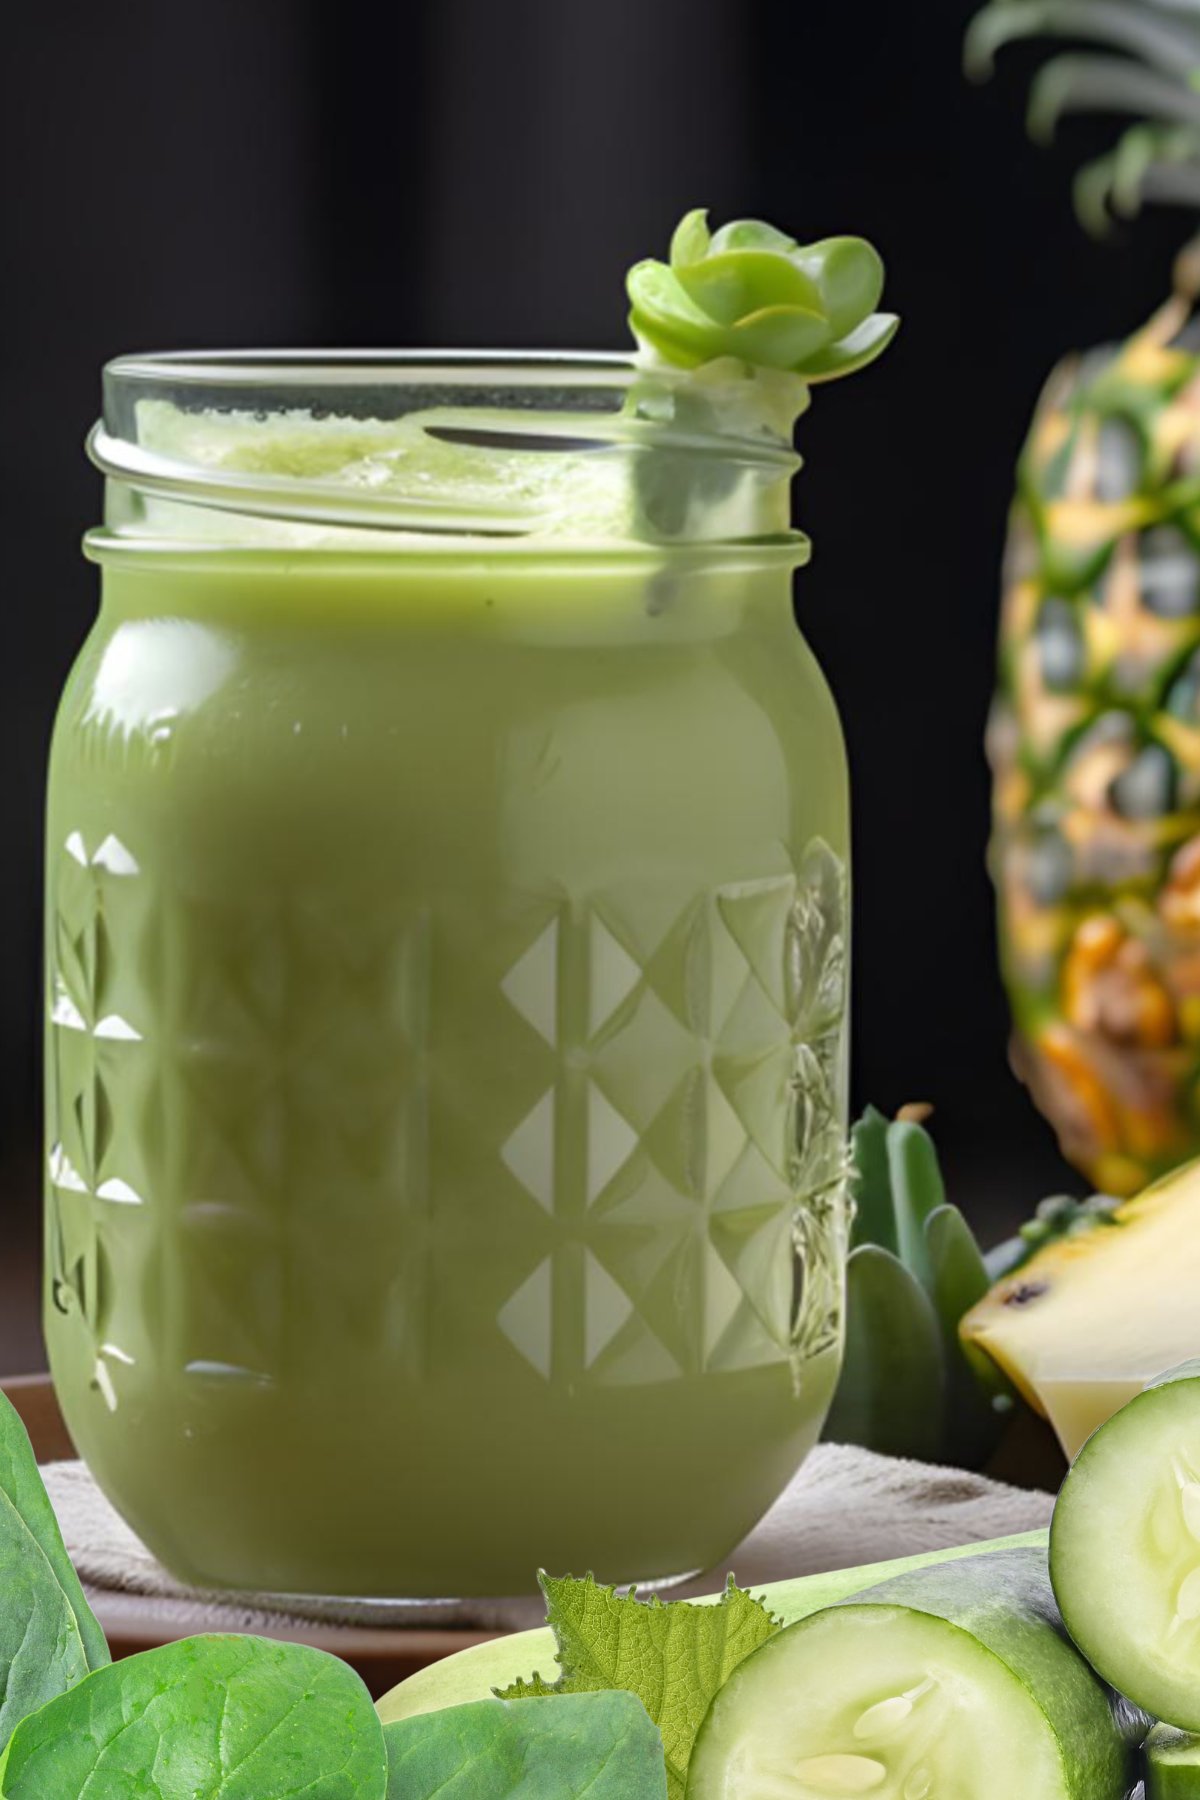 Cholesterol-Lowering Pineapple Spinach Smoothie